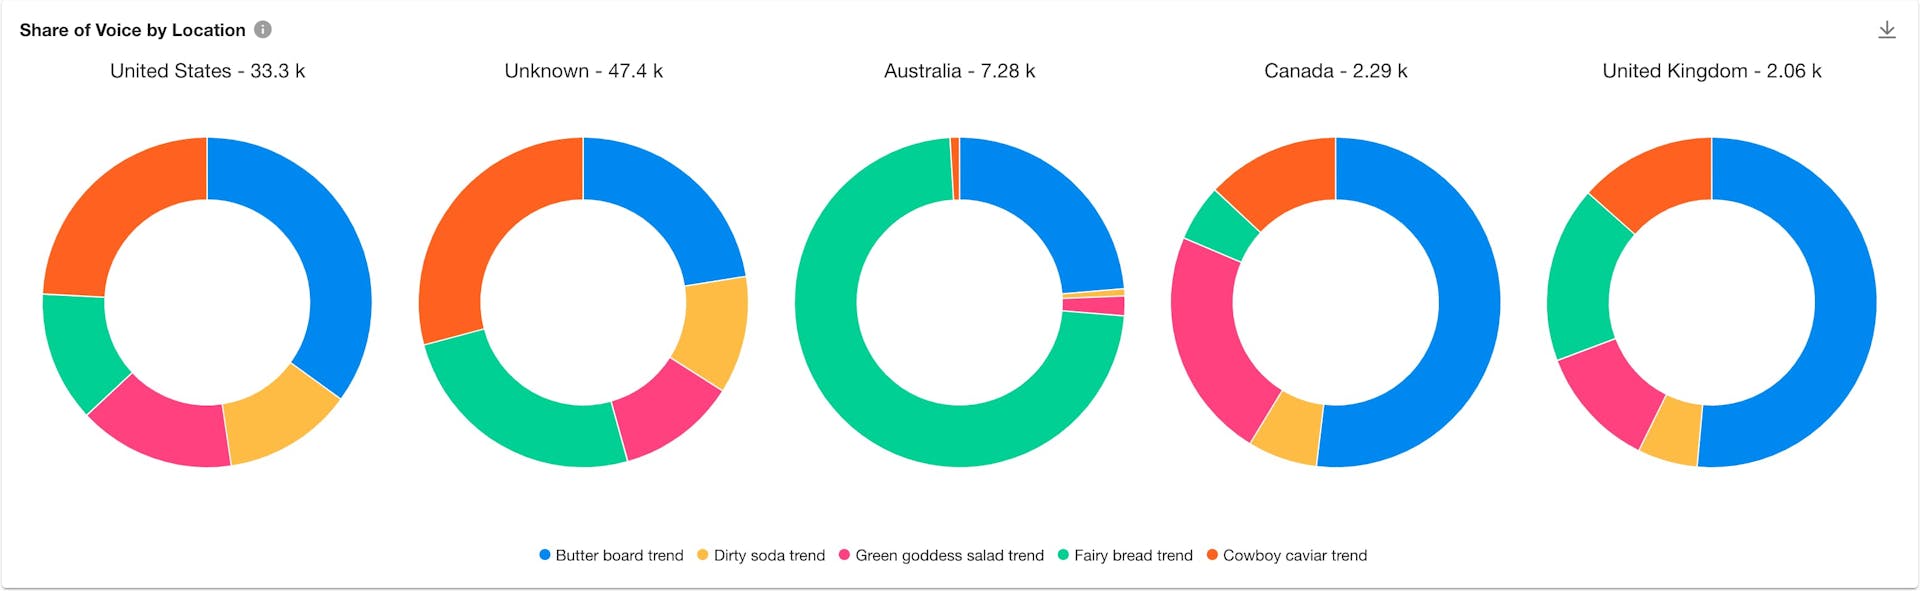 Screenshot from the Meltwater social listening platform showing shares of voice by location of five food trends.